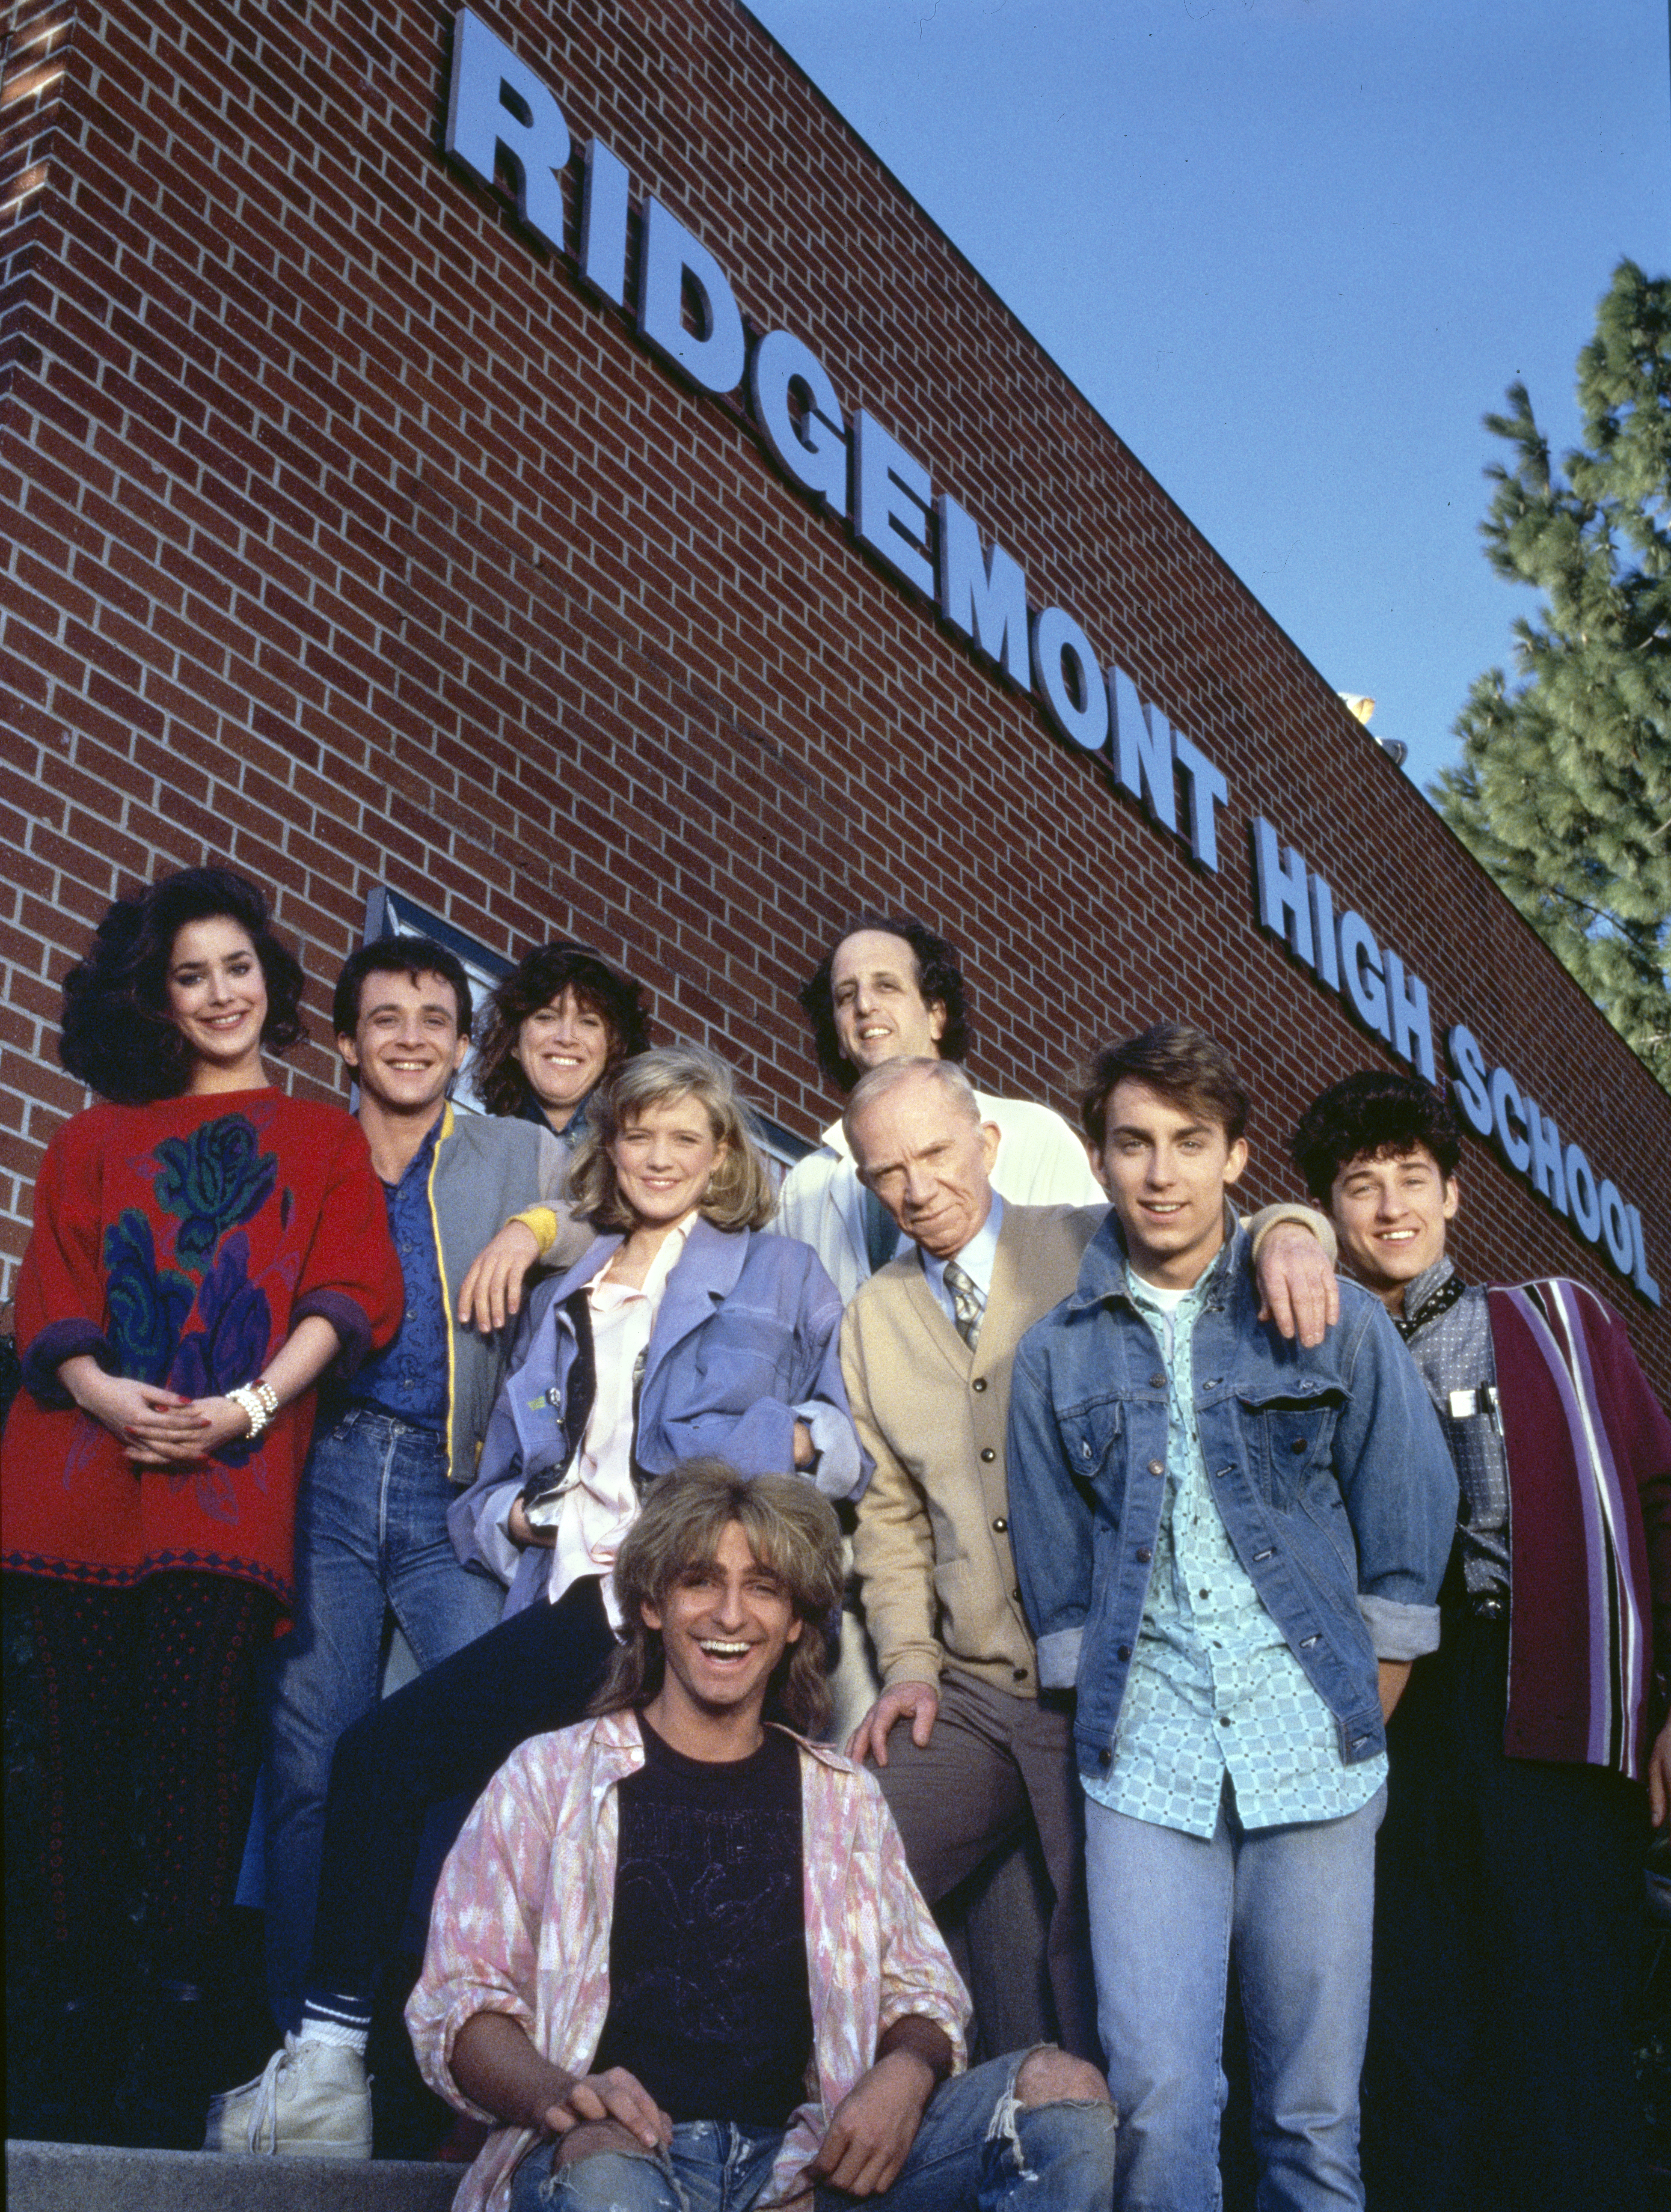 Cast of "First Times at Ridgemont High." | Source: Getty Images